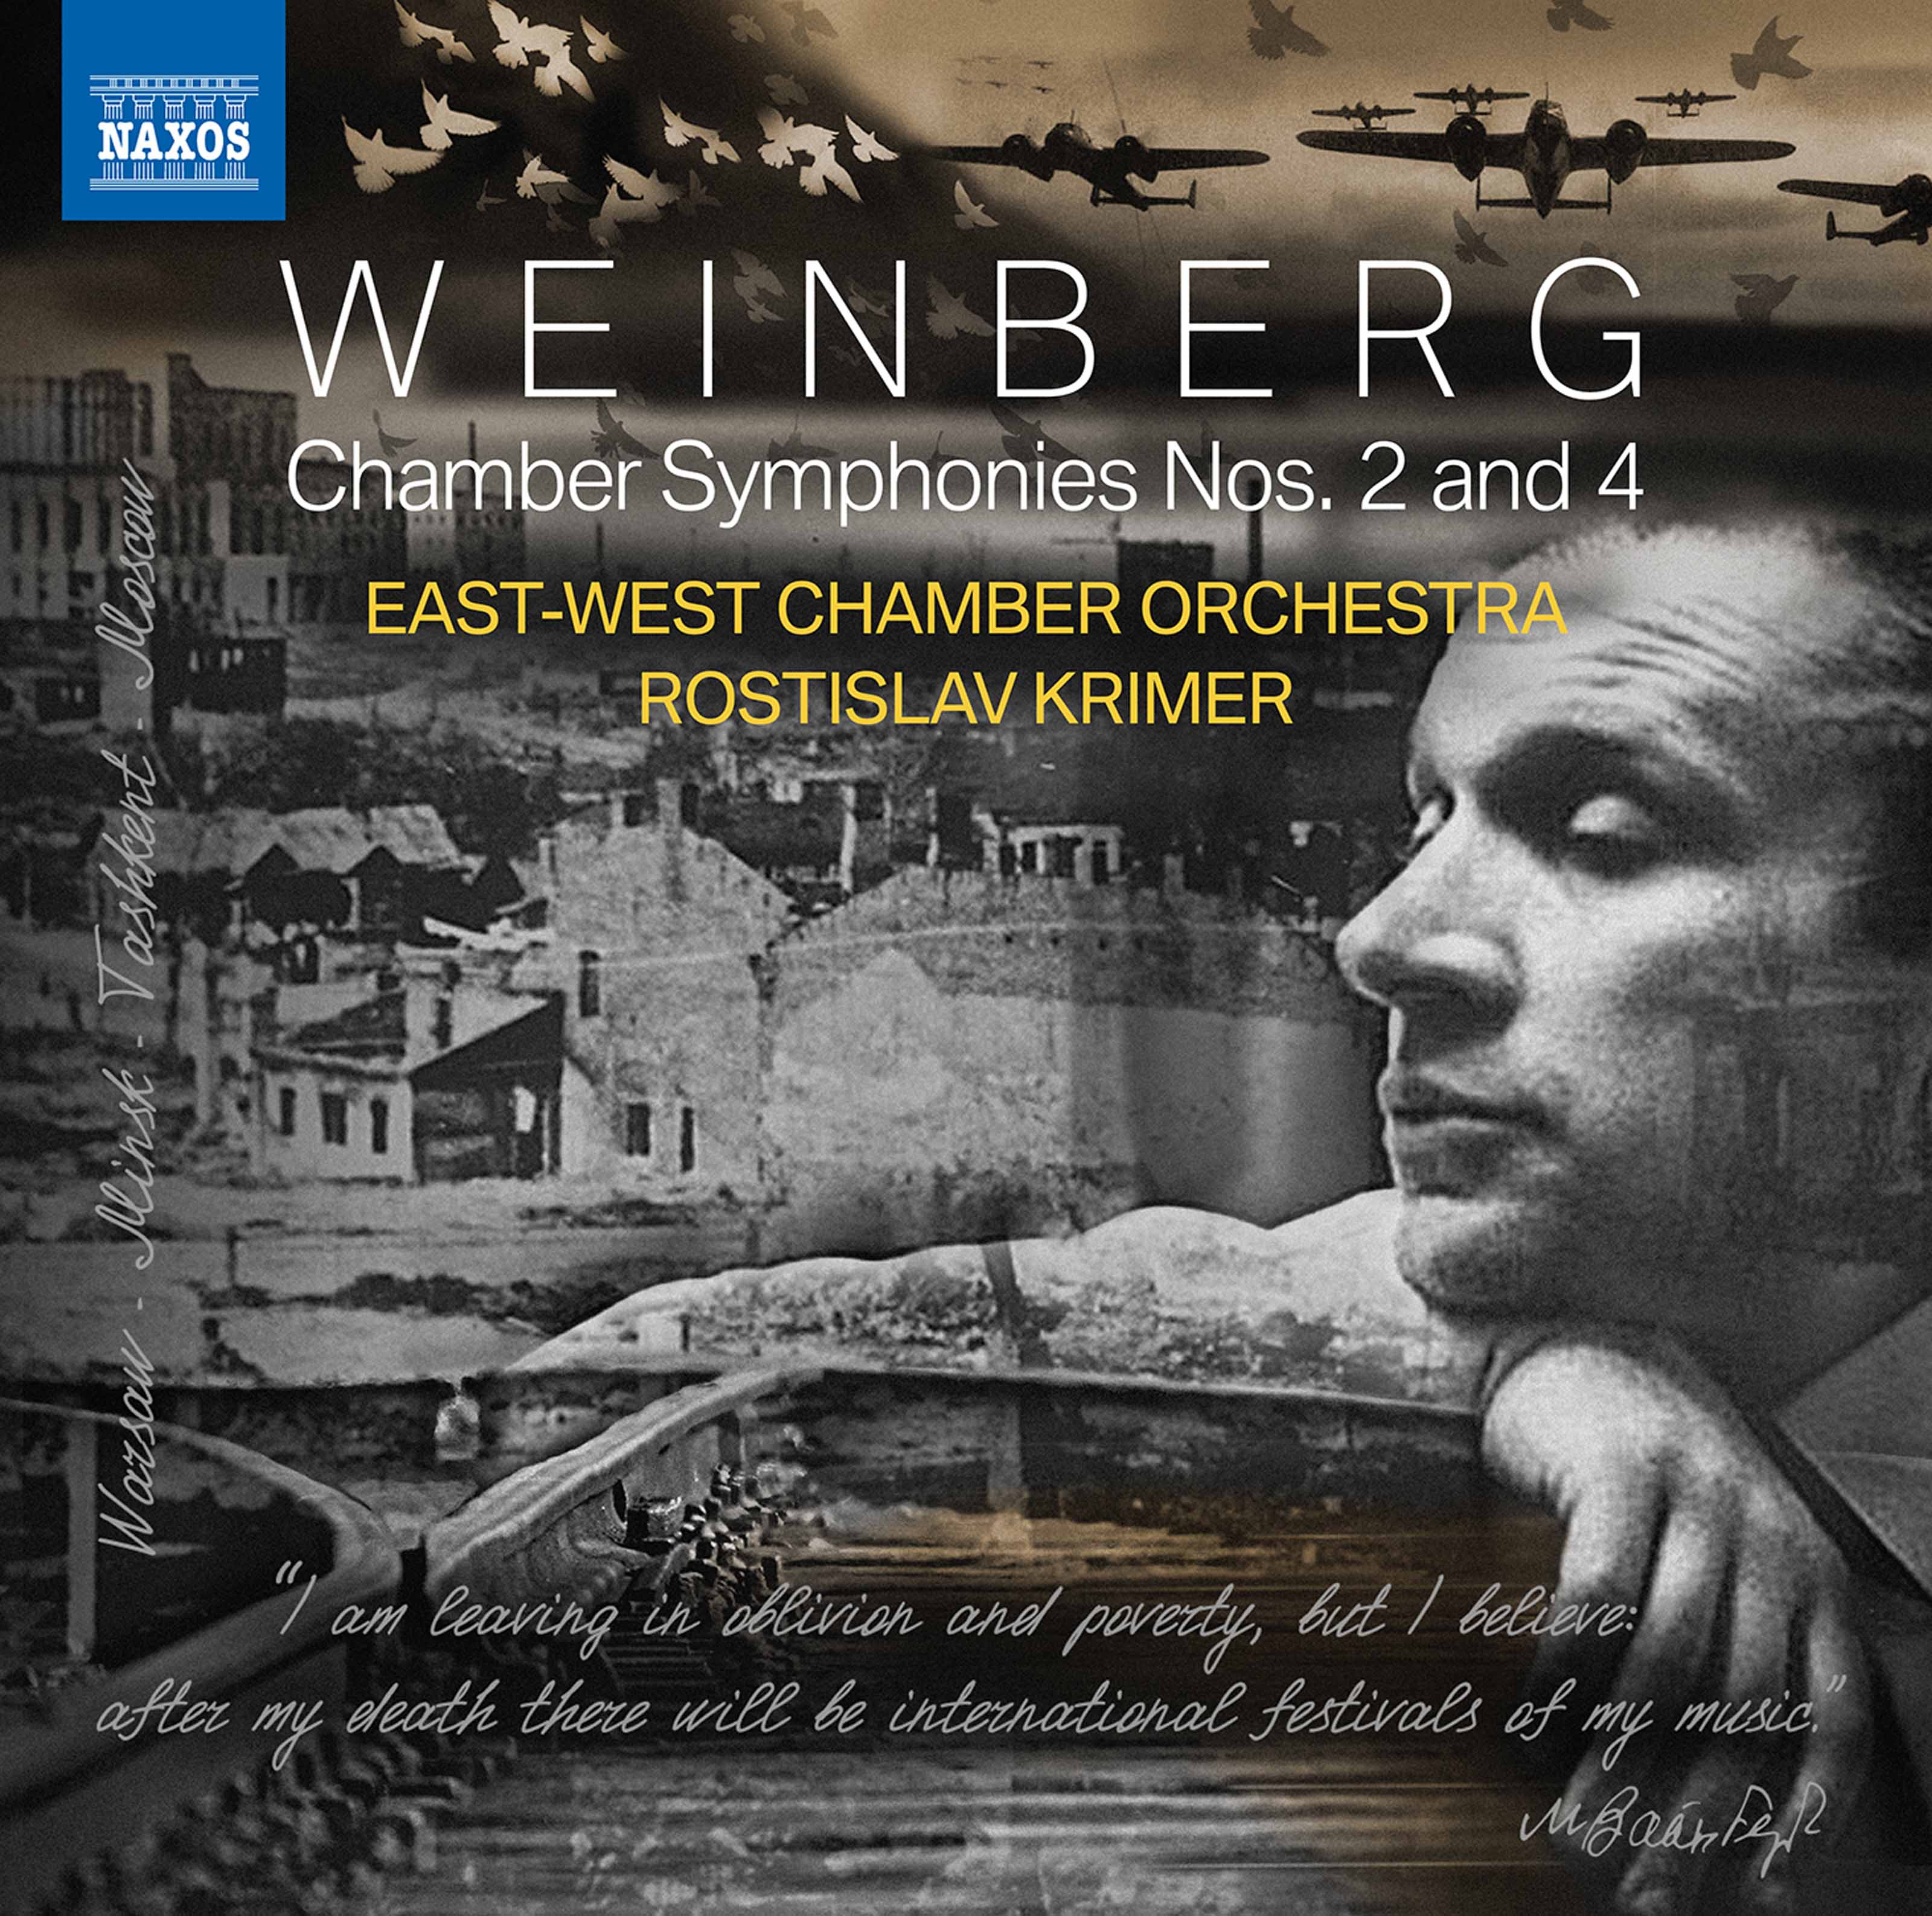 Yet more Weinberg: Chamber Symphonies